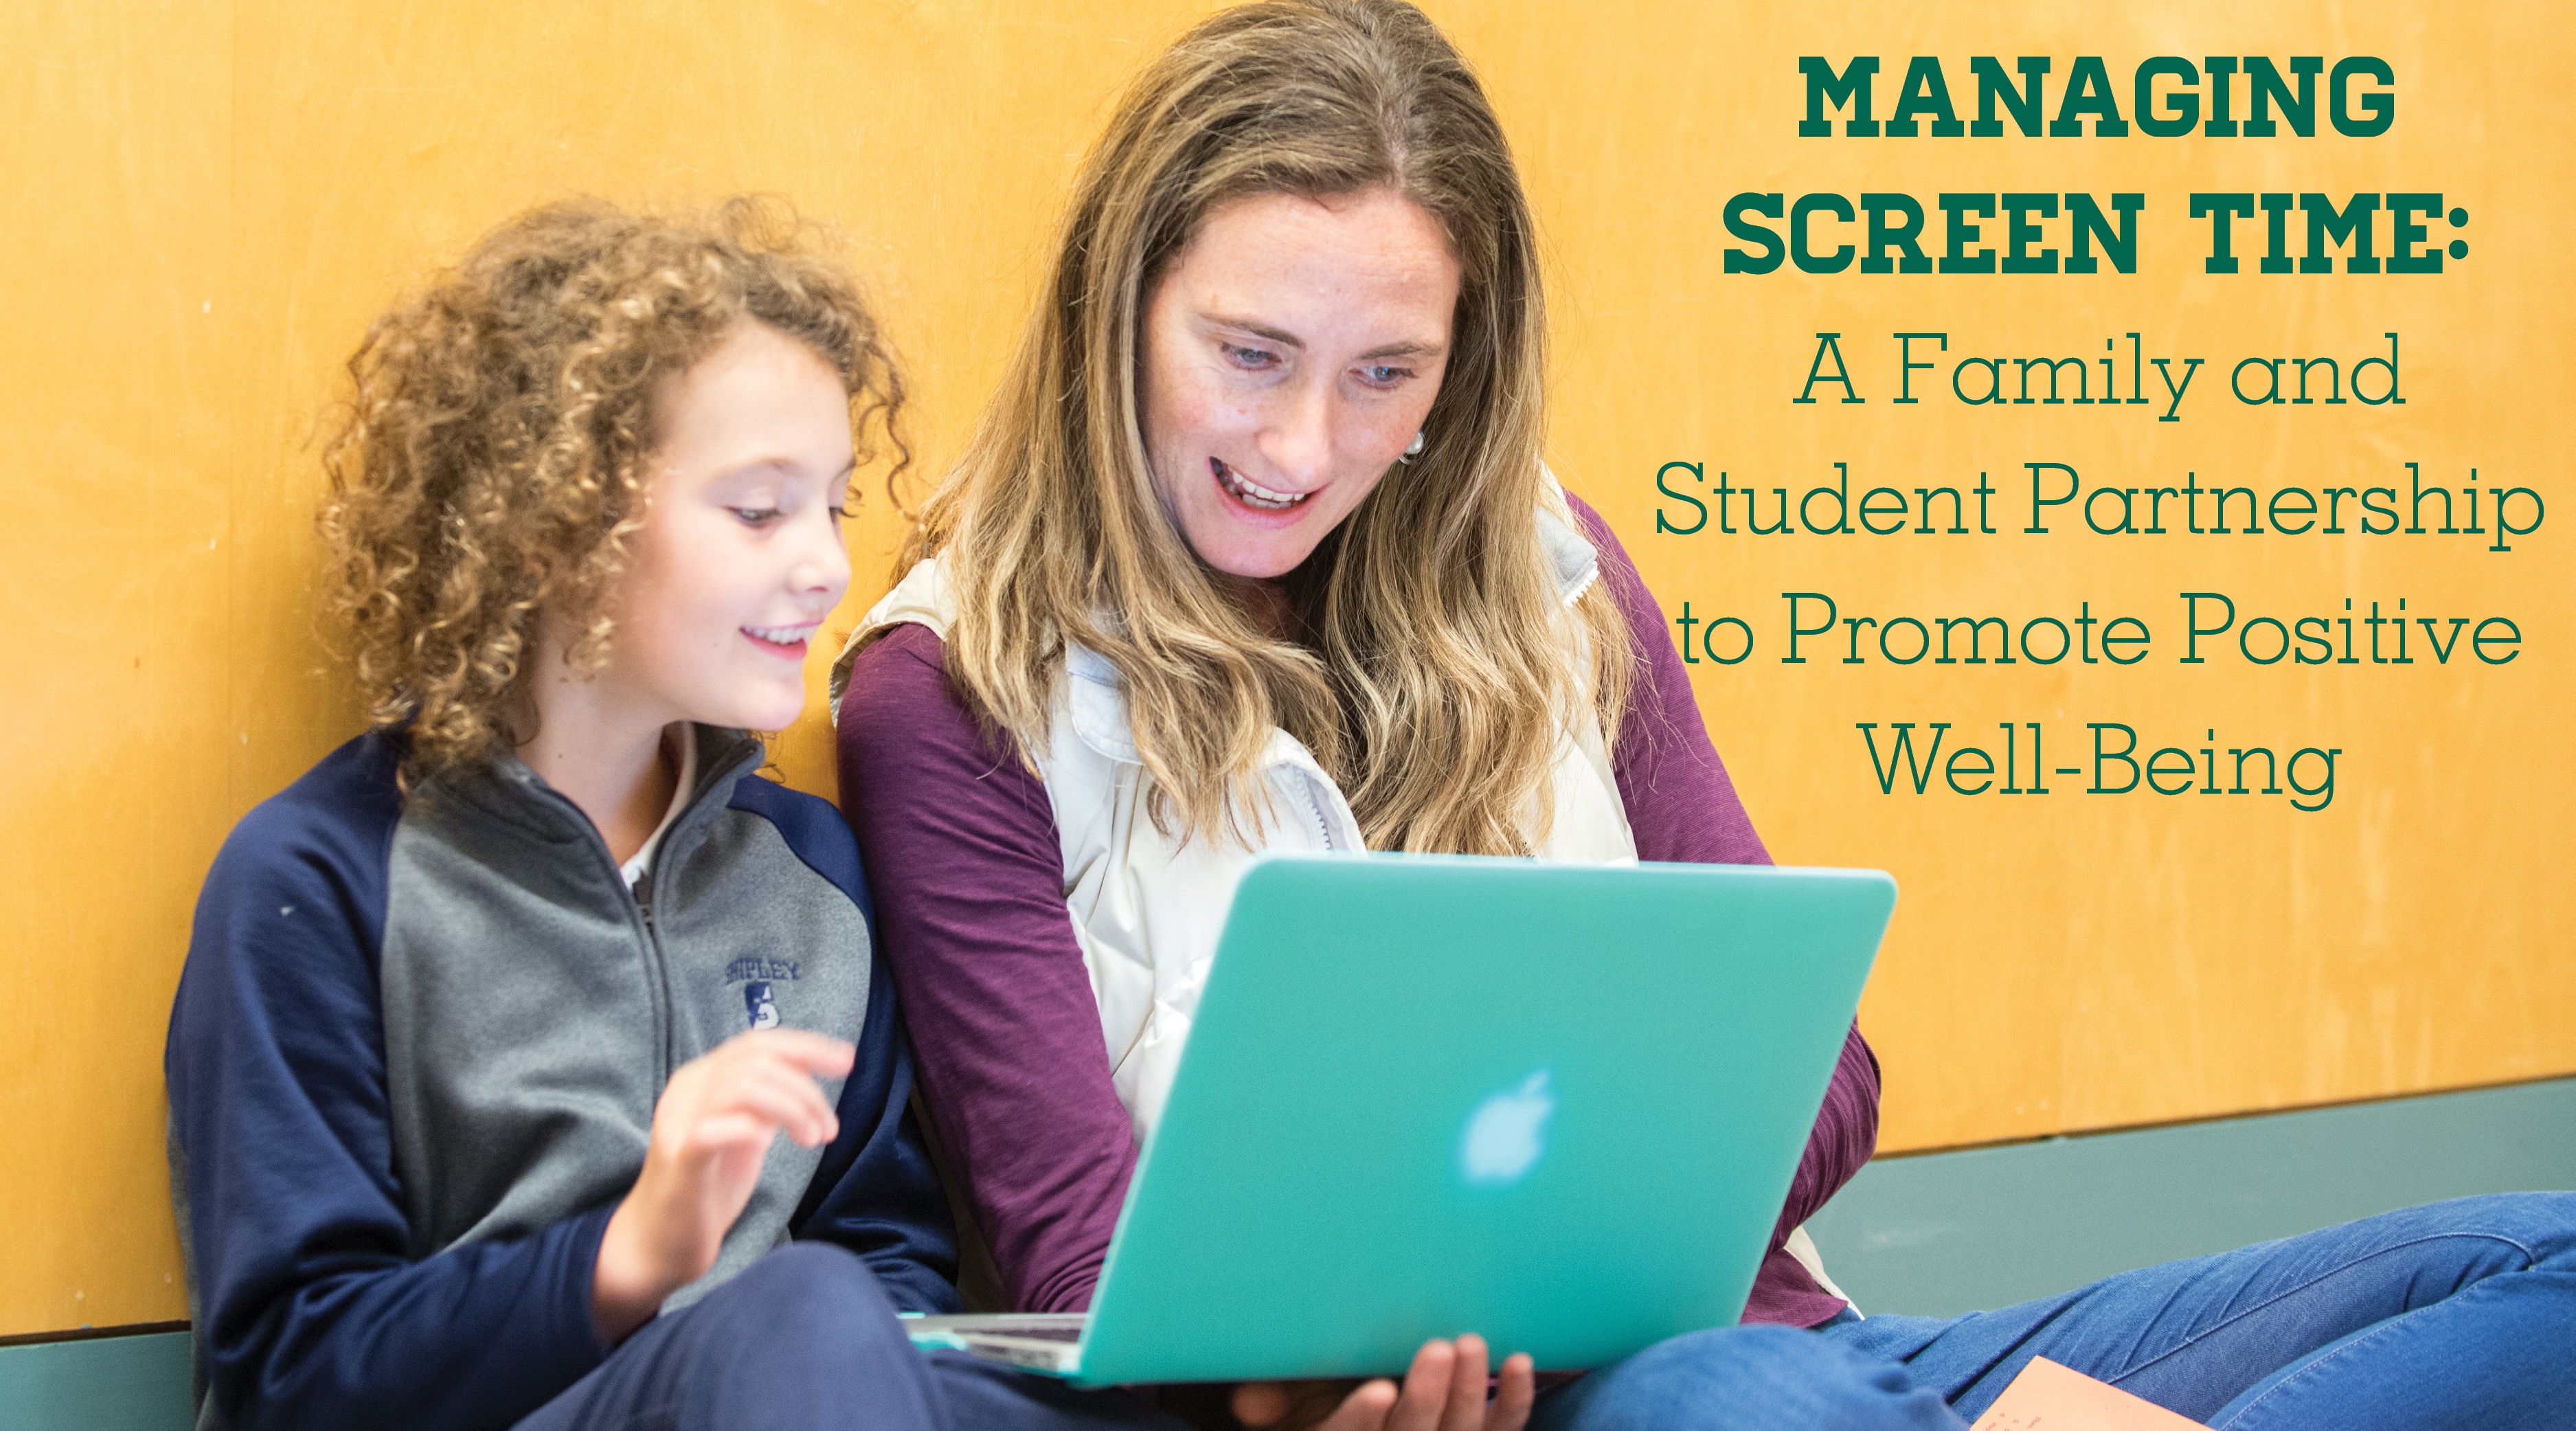 Managing Screen Time: A Family and Student Partnership to Promote Positive Well-Being